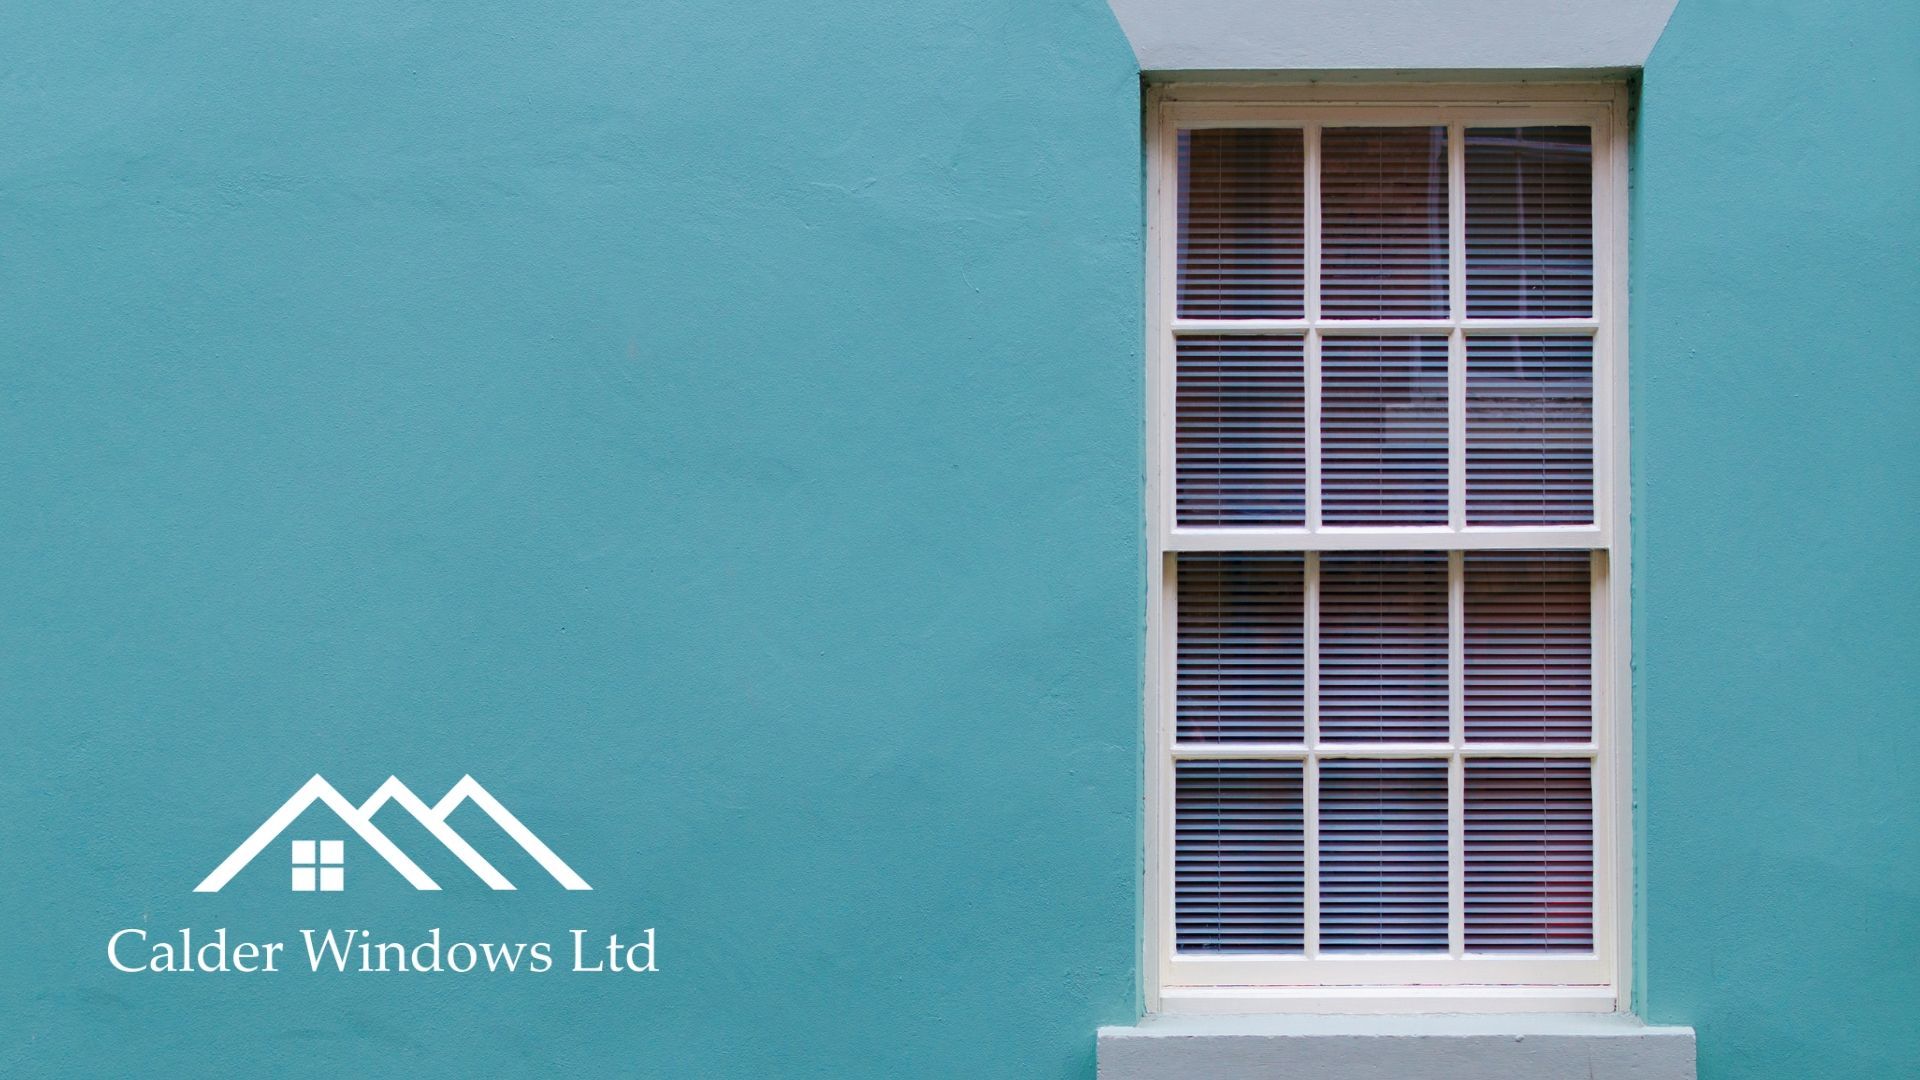 Calder Windows specialists in uPVC sash windows. But what are they, exactly? Learn more today.
